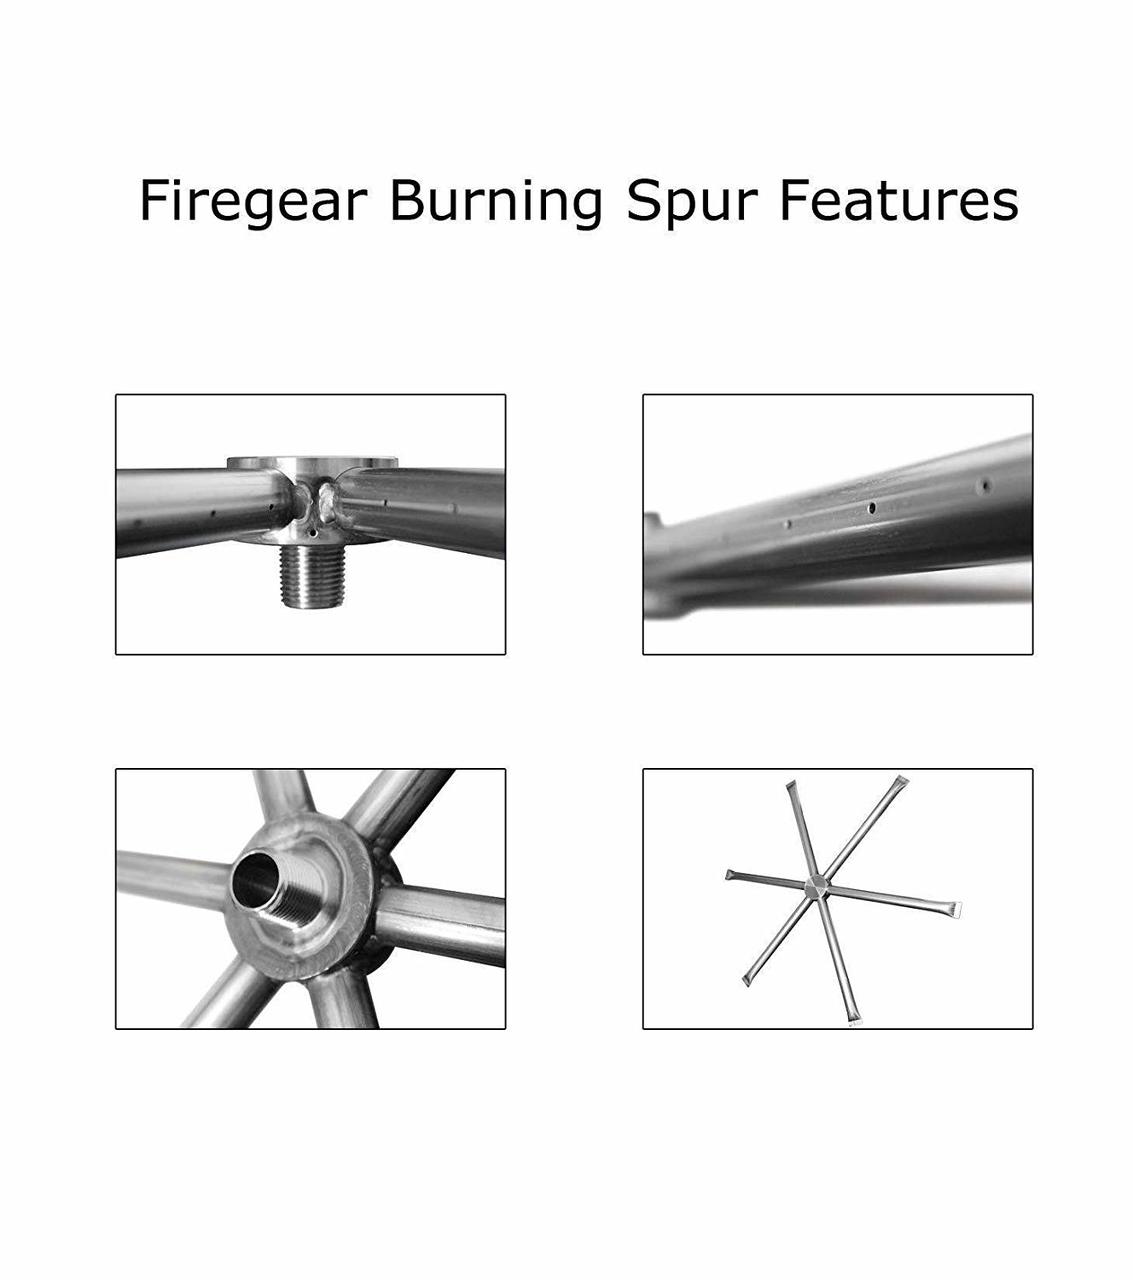 Firegear Round Stainless Steel Burning Spur Kit for Outdoor Fire-pit - Electronic Ignition